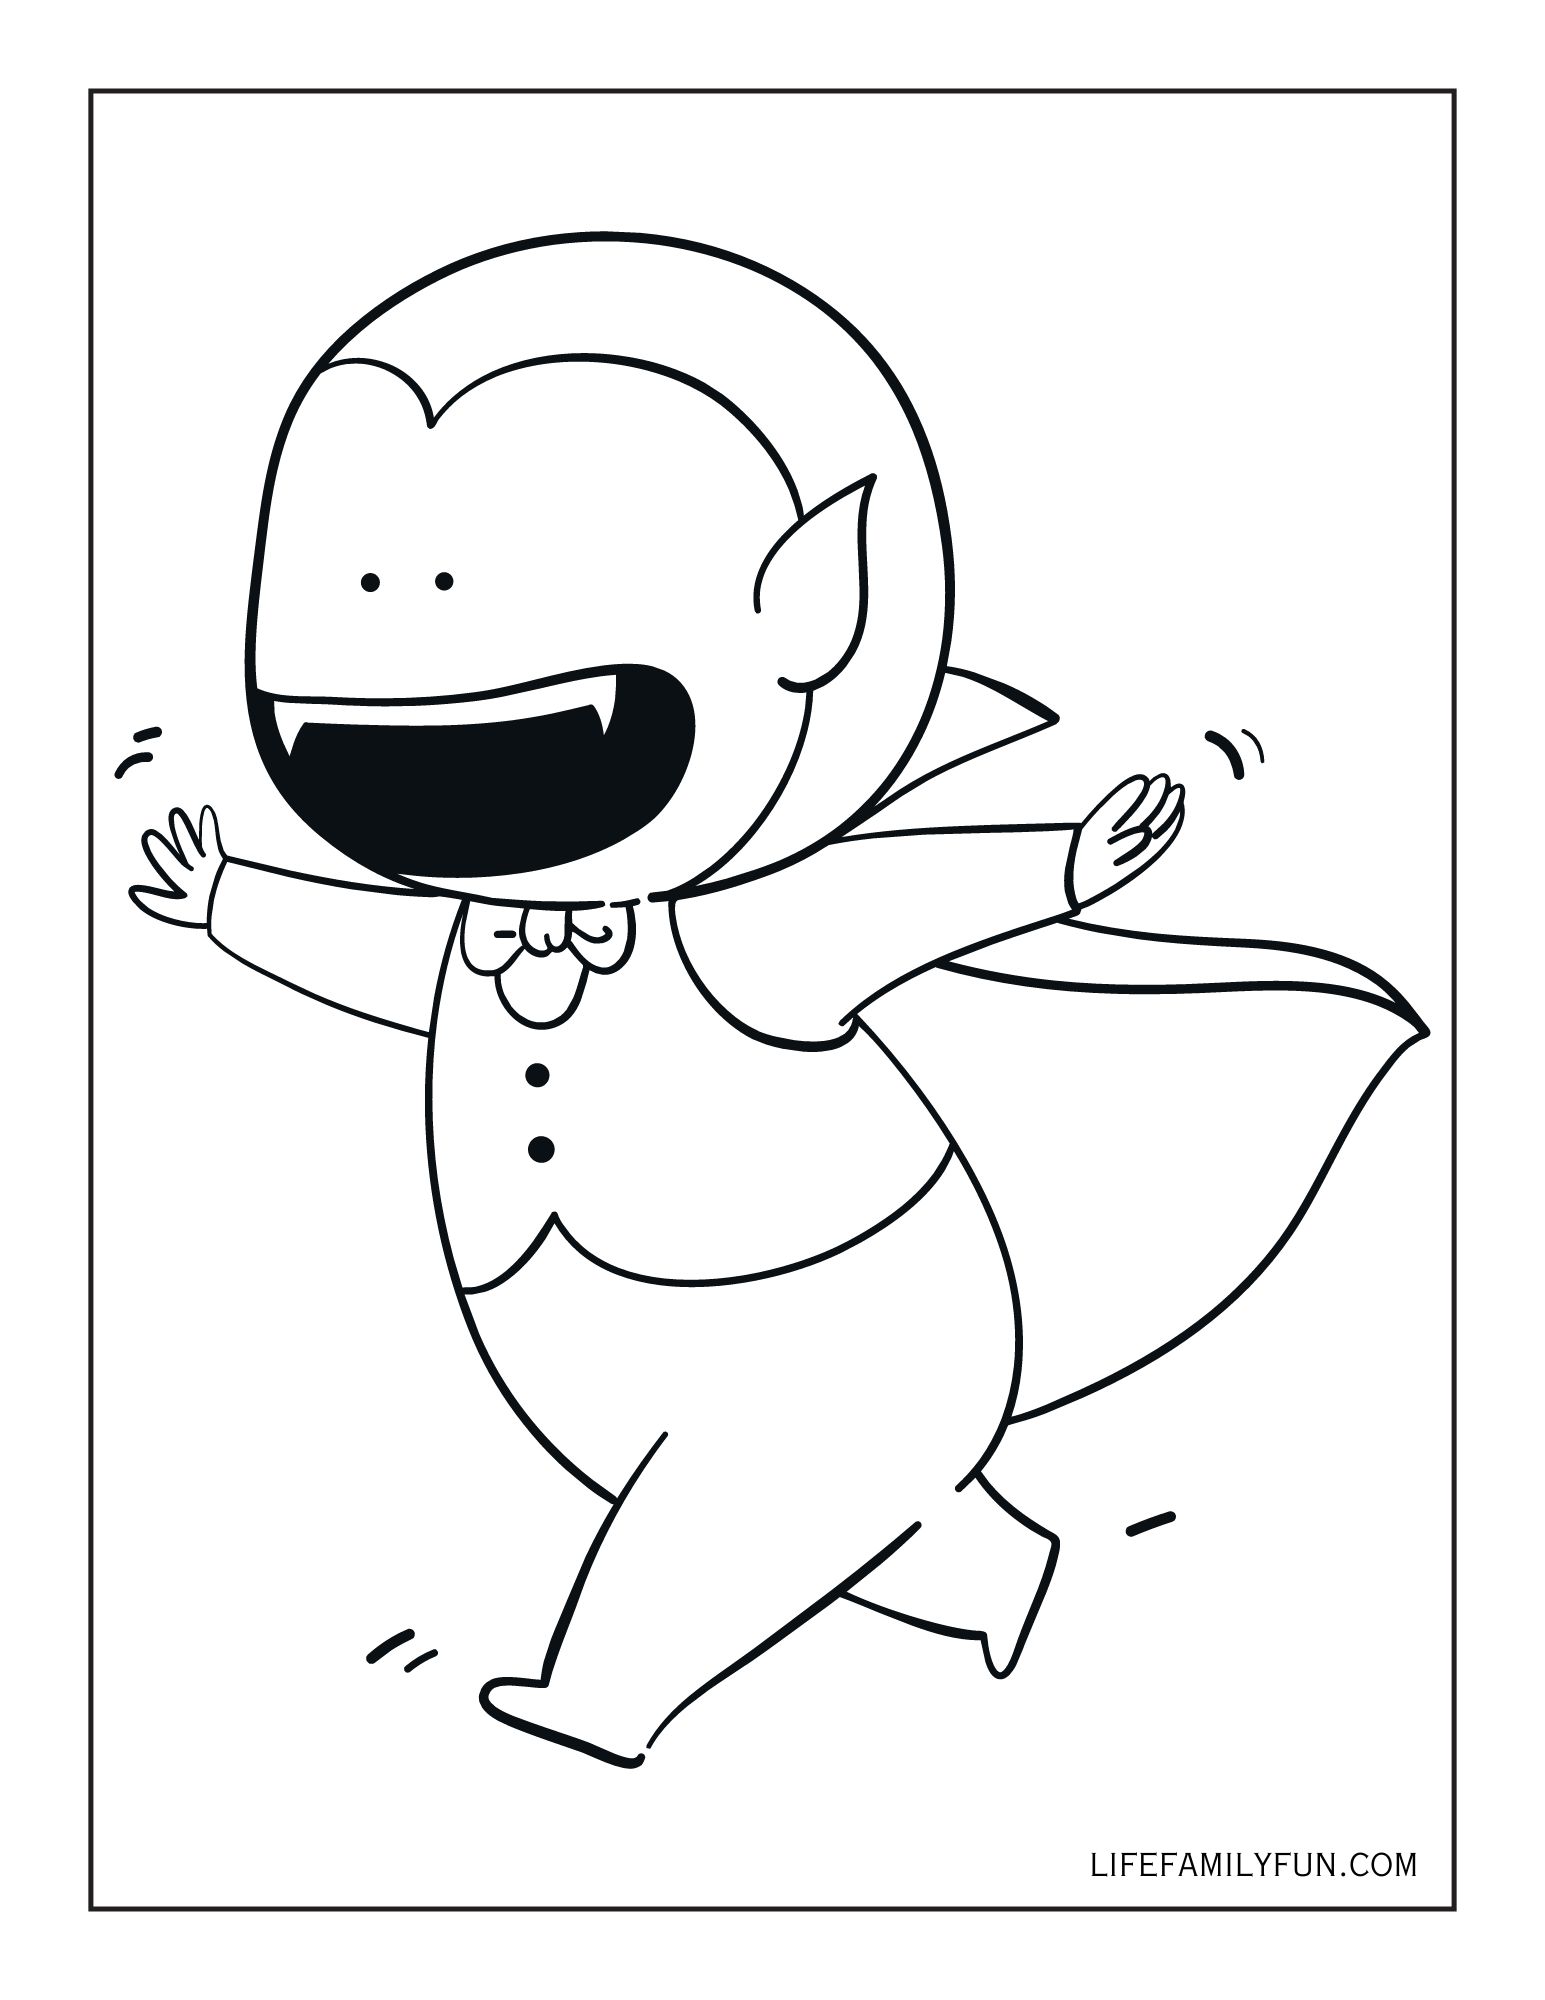 Halloween vampire running coloring page